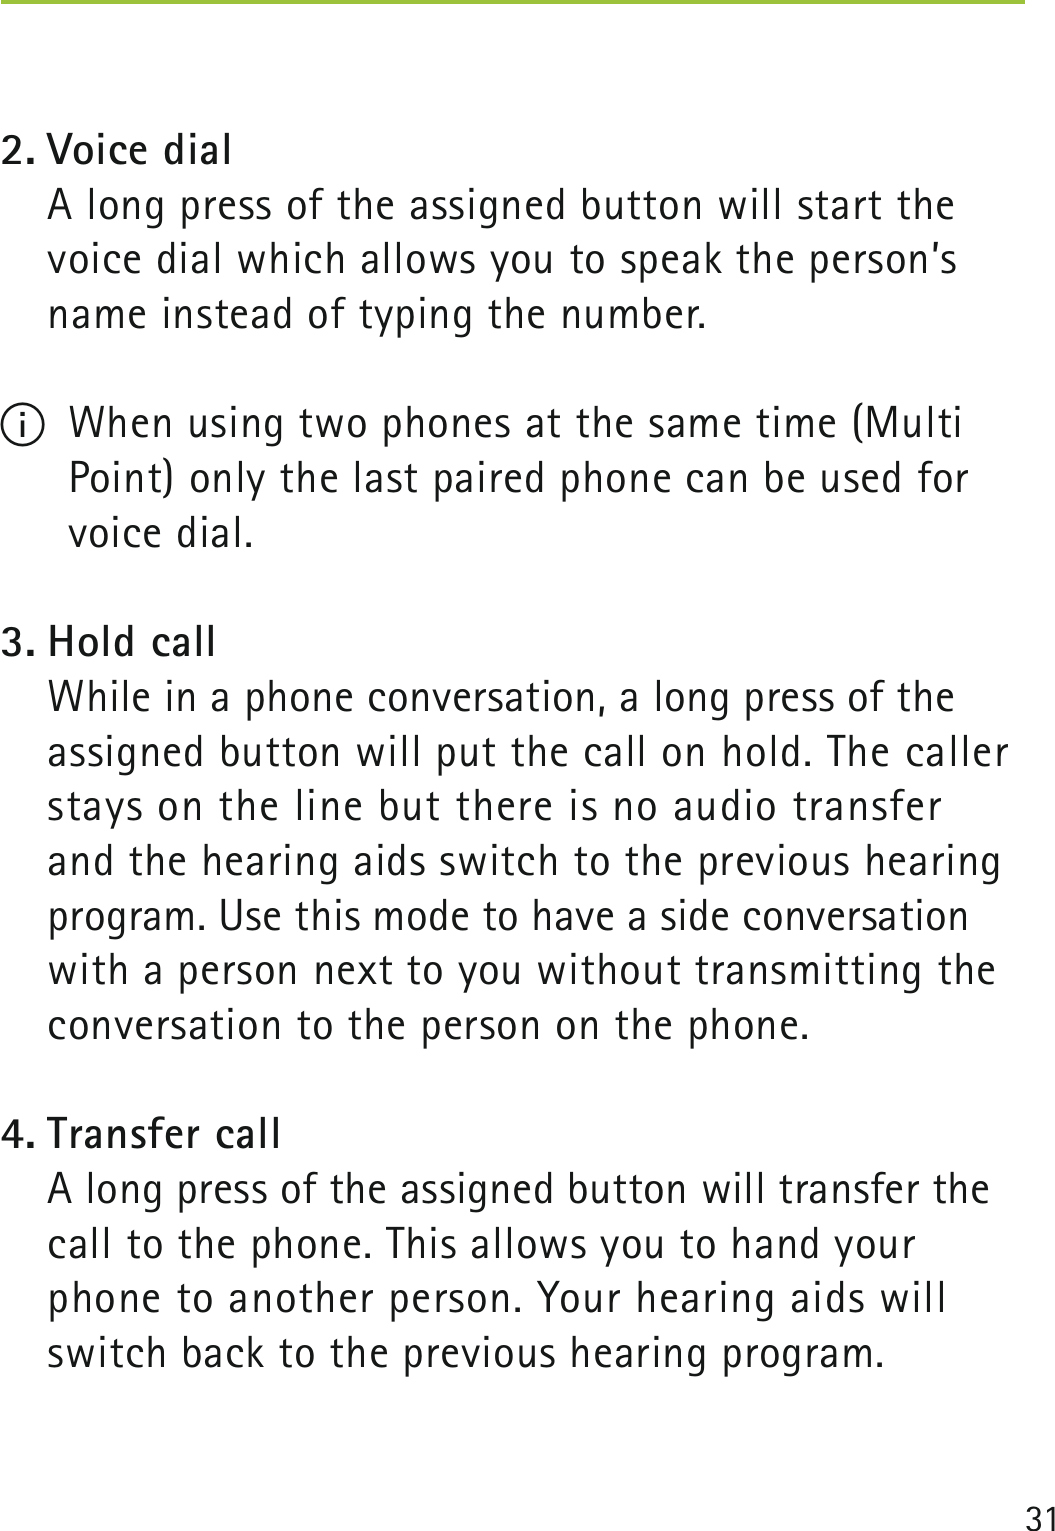 312. Voice dial    A long press of the assigned button will start the voice dial which allows you to speak the person’s name instead of typing the number.I  When using two phones at the same time (Multi Point) only the last paired phone can be used for voice dial.3. Hold call    While in a phone conversation, a long press of the assigned button will put the call on hold. The caller stays on the line but there is no audio transfer  and the hearing aids switch to the previous hearing program. Use this mode to have a side conversation with a person next to you without transmitting the conversation to the person on the phone.4. Transfer call    A long press of the assigned button will transfer the call to the phone. This allows you to hand your phone to another person. Your hearing aids will switch back to the previous hearing program.  